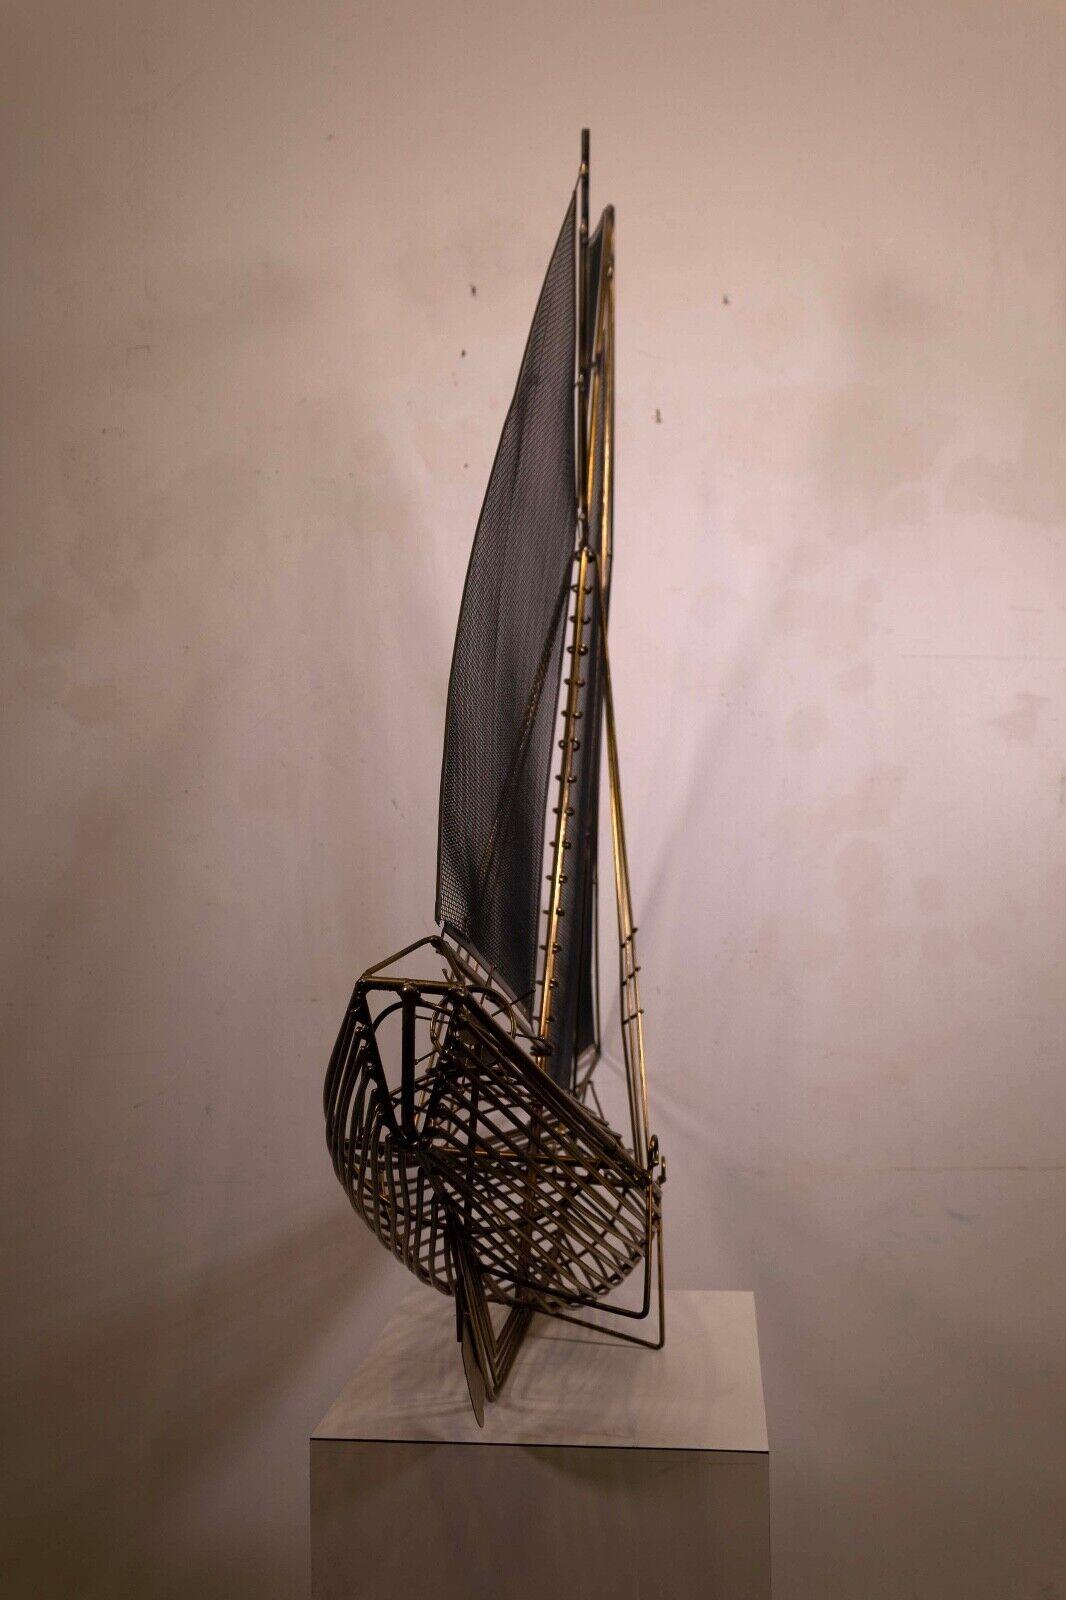 This mid-century modern sculpture by C. Jere is a stylized representation of a sailboat, crafted from golden metal, capturing the elegance and simplicity of nautical design. The piece is signed by the artist, dating to 1982, and features slender